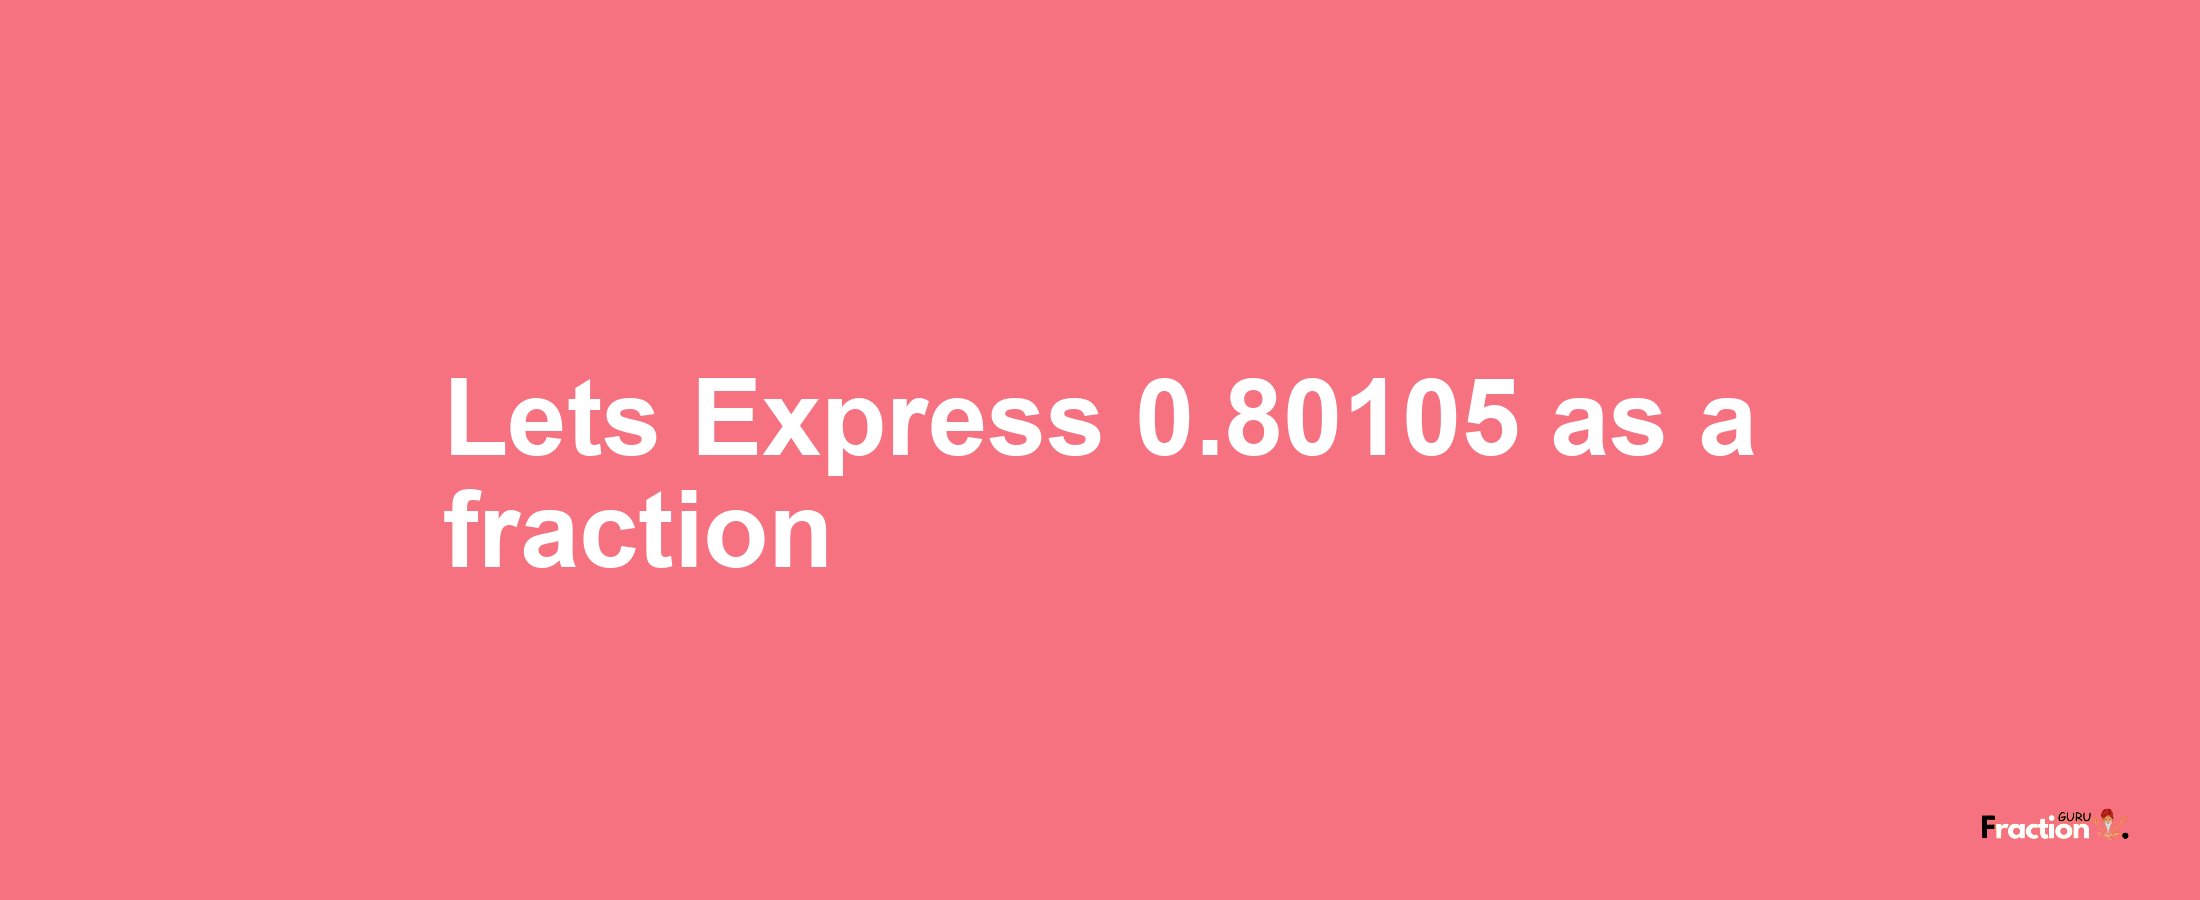 Lets Express 0.80105 as afraction